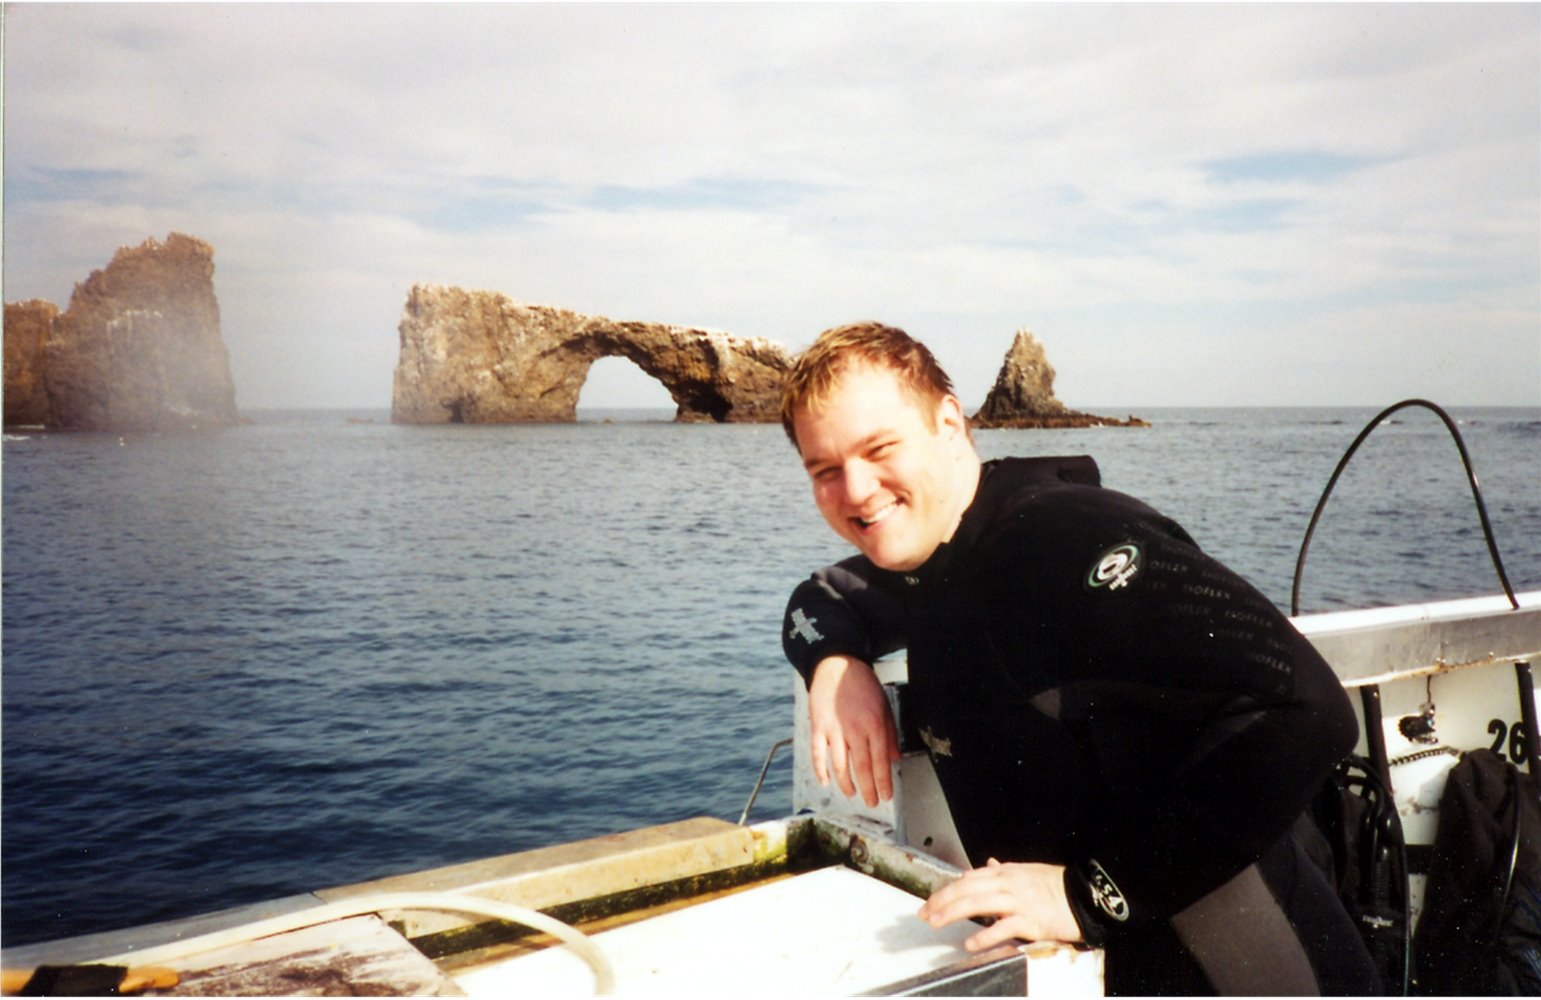 Me diving Channel Islands